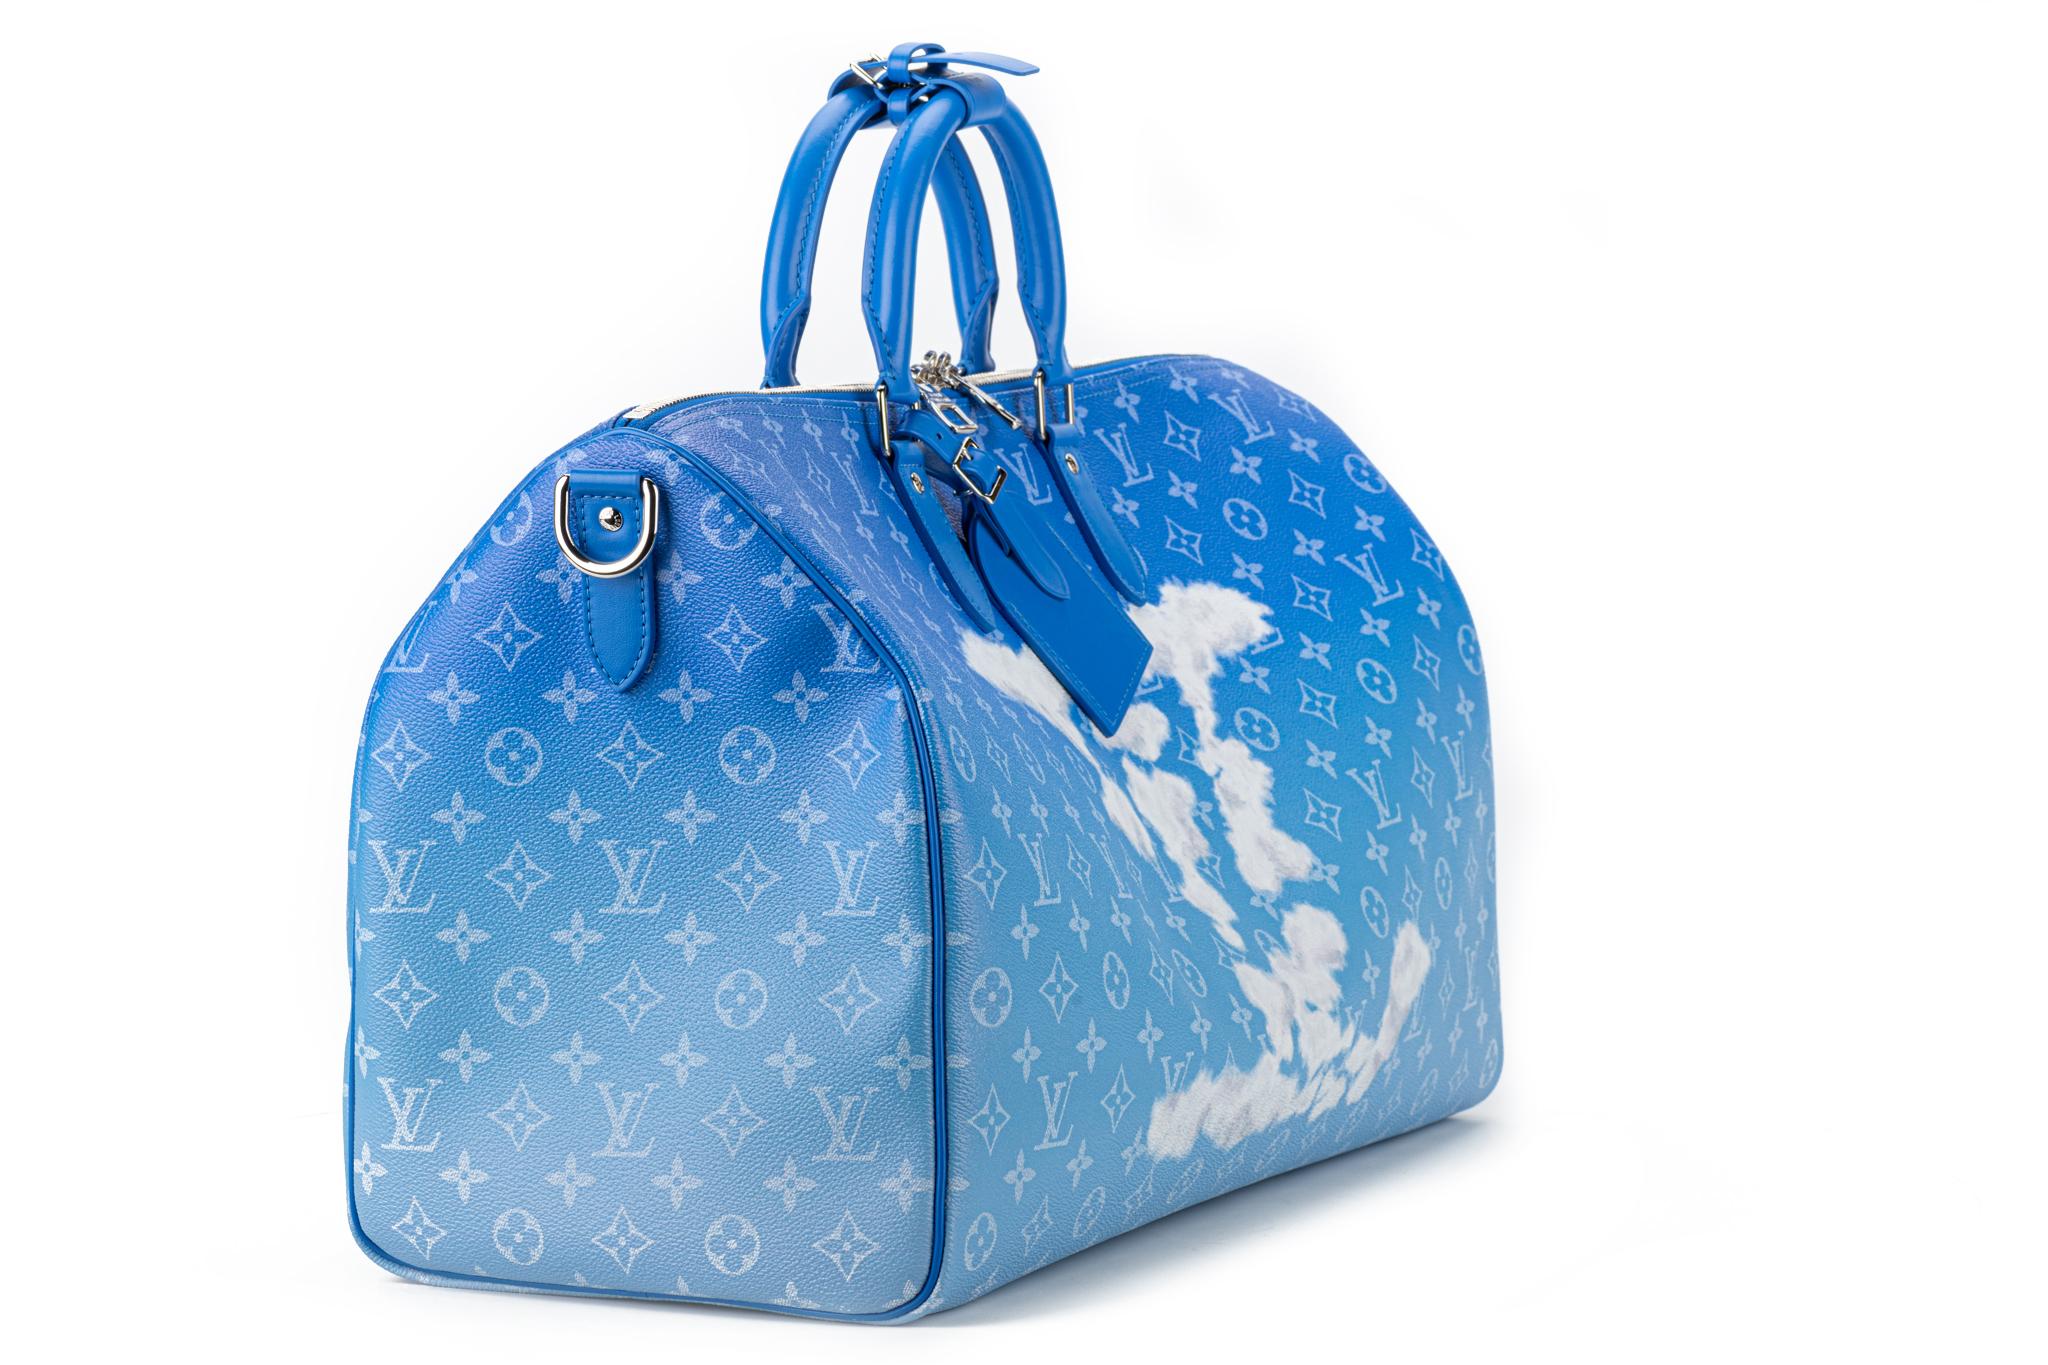 New in Box Louis Vuitton Limited Edition Clouds Keepall Abloh Bag 2